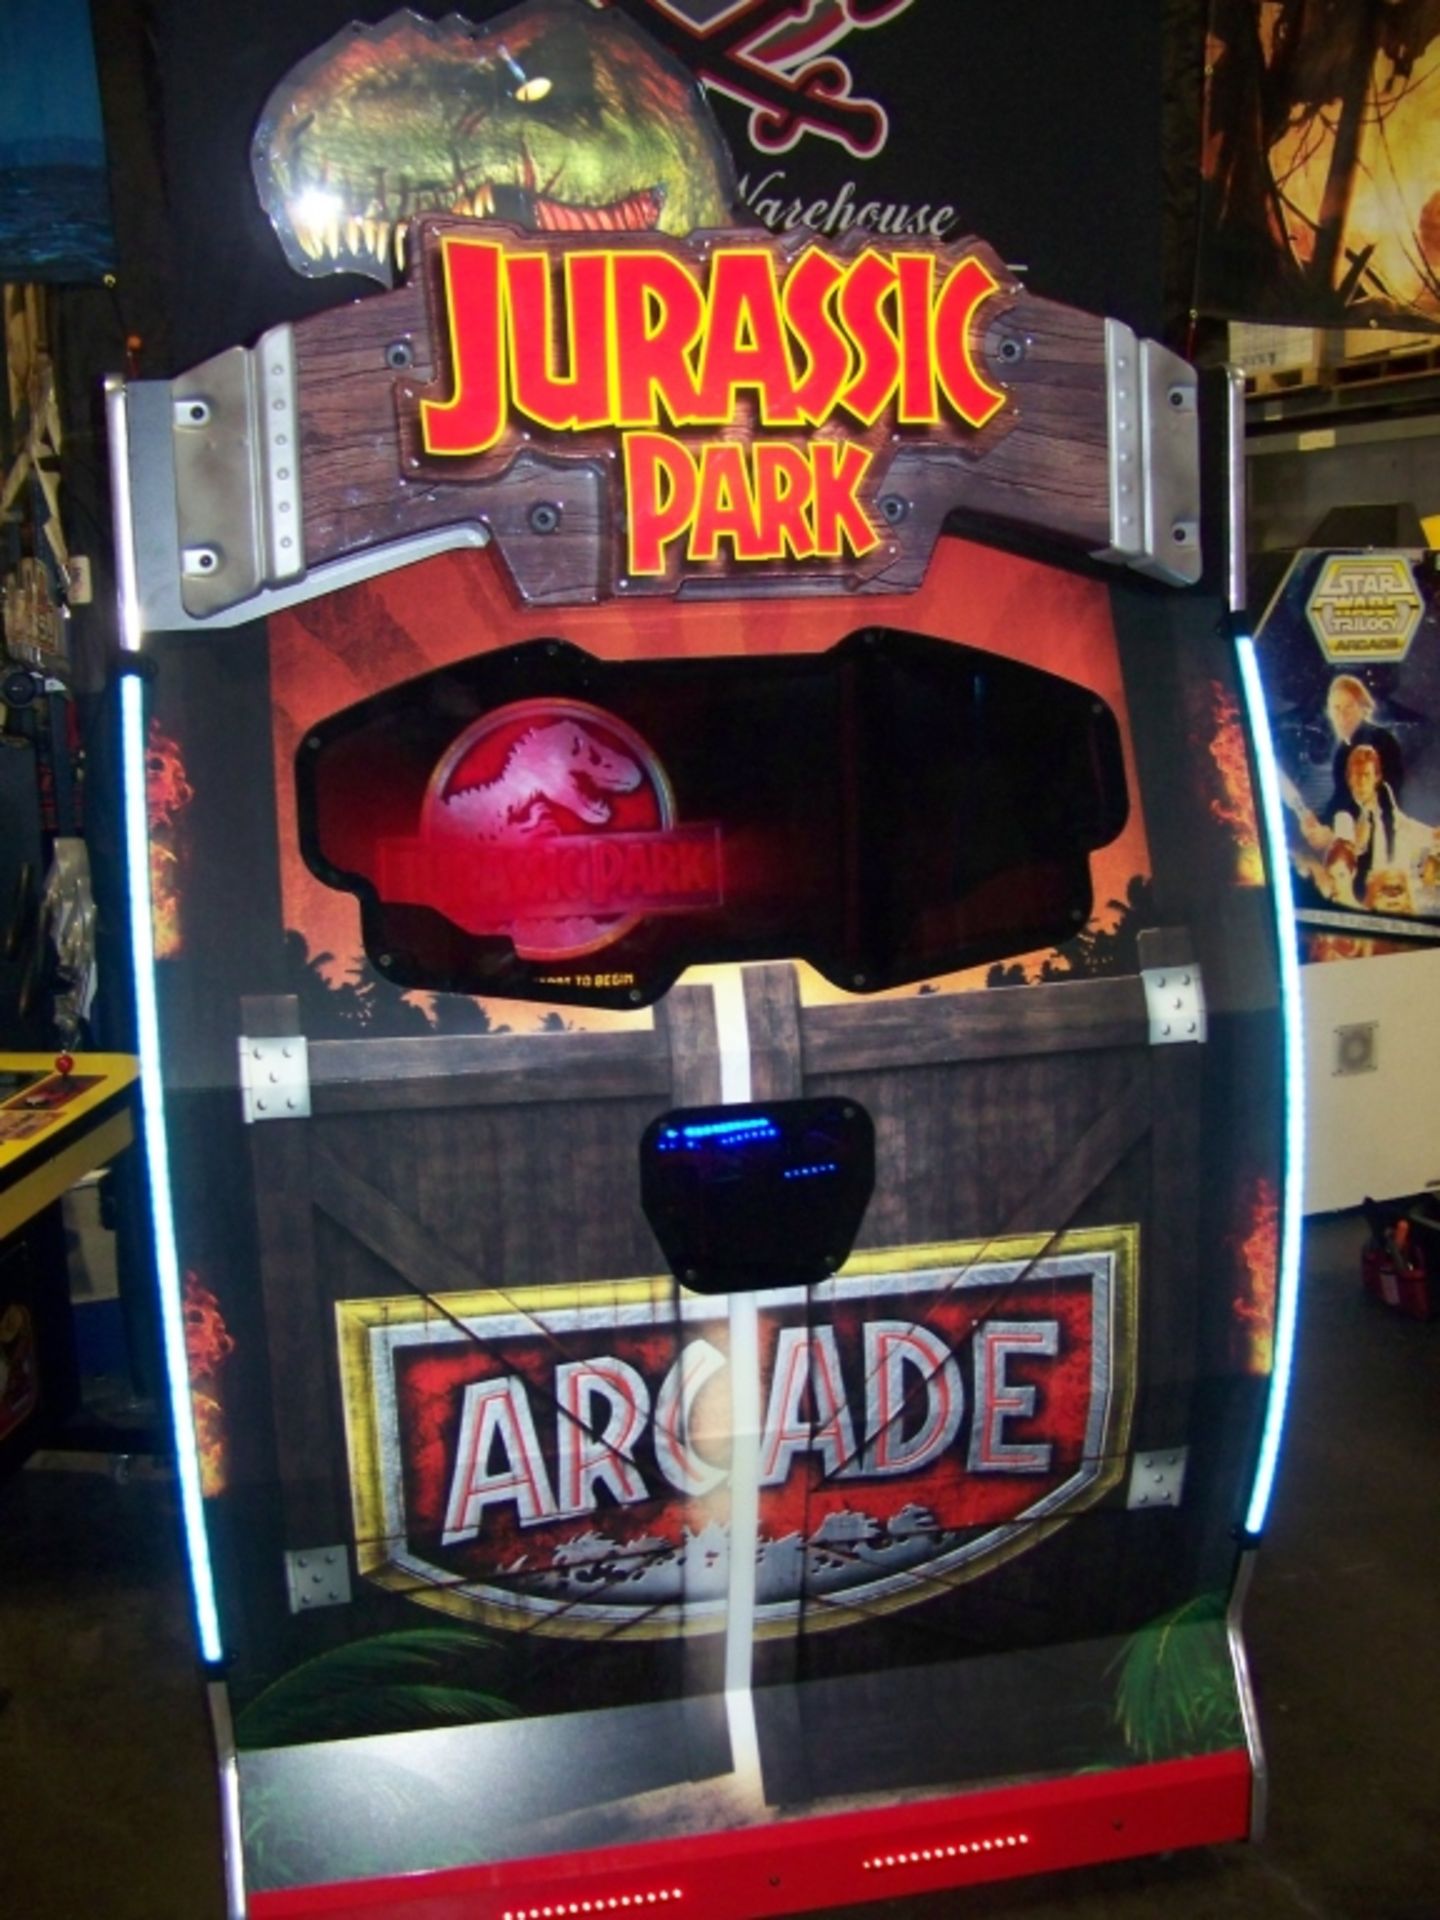 JURASSIC PARK DELUXE ARCADE GAME BRAND NEW!! Item is in used condition. Evidence of wear and - Image 6 of 8